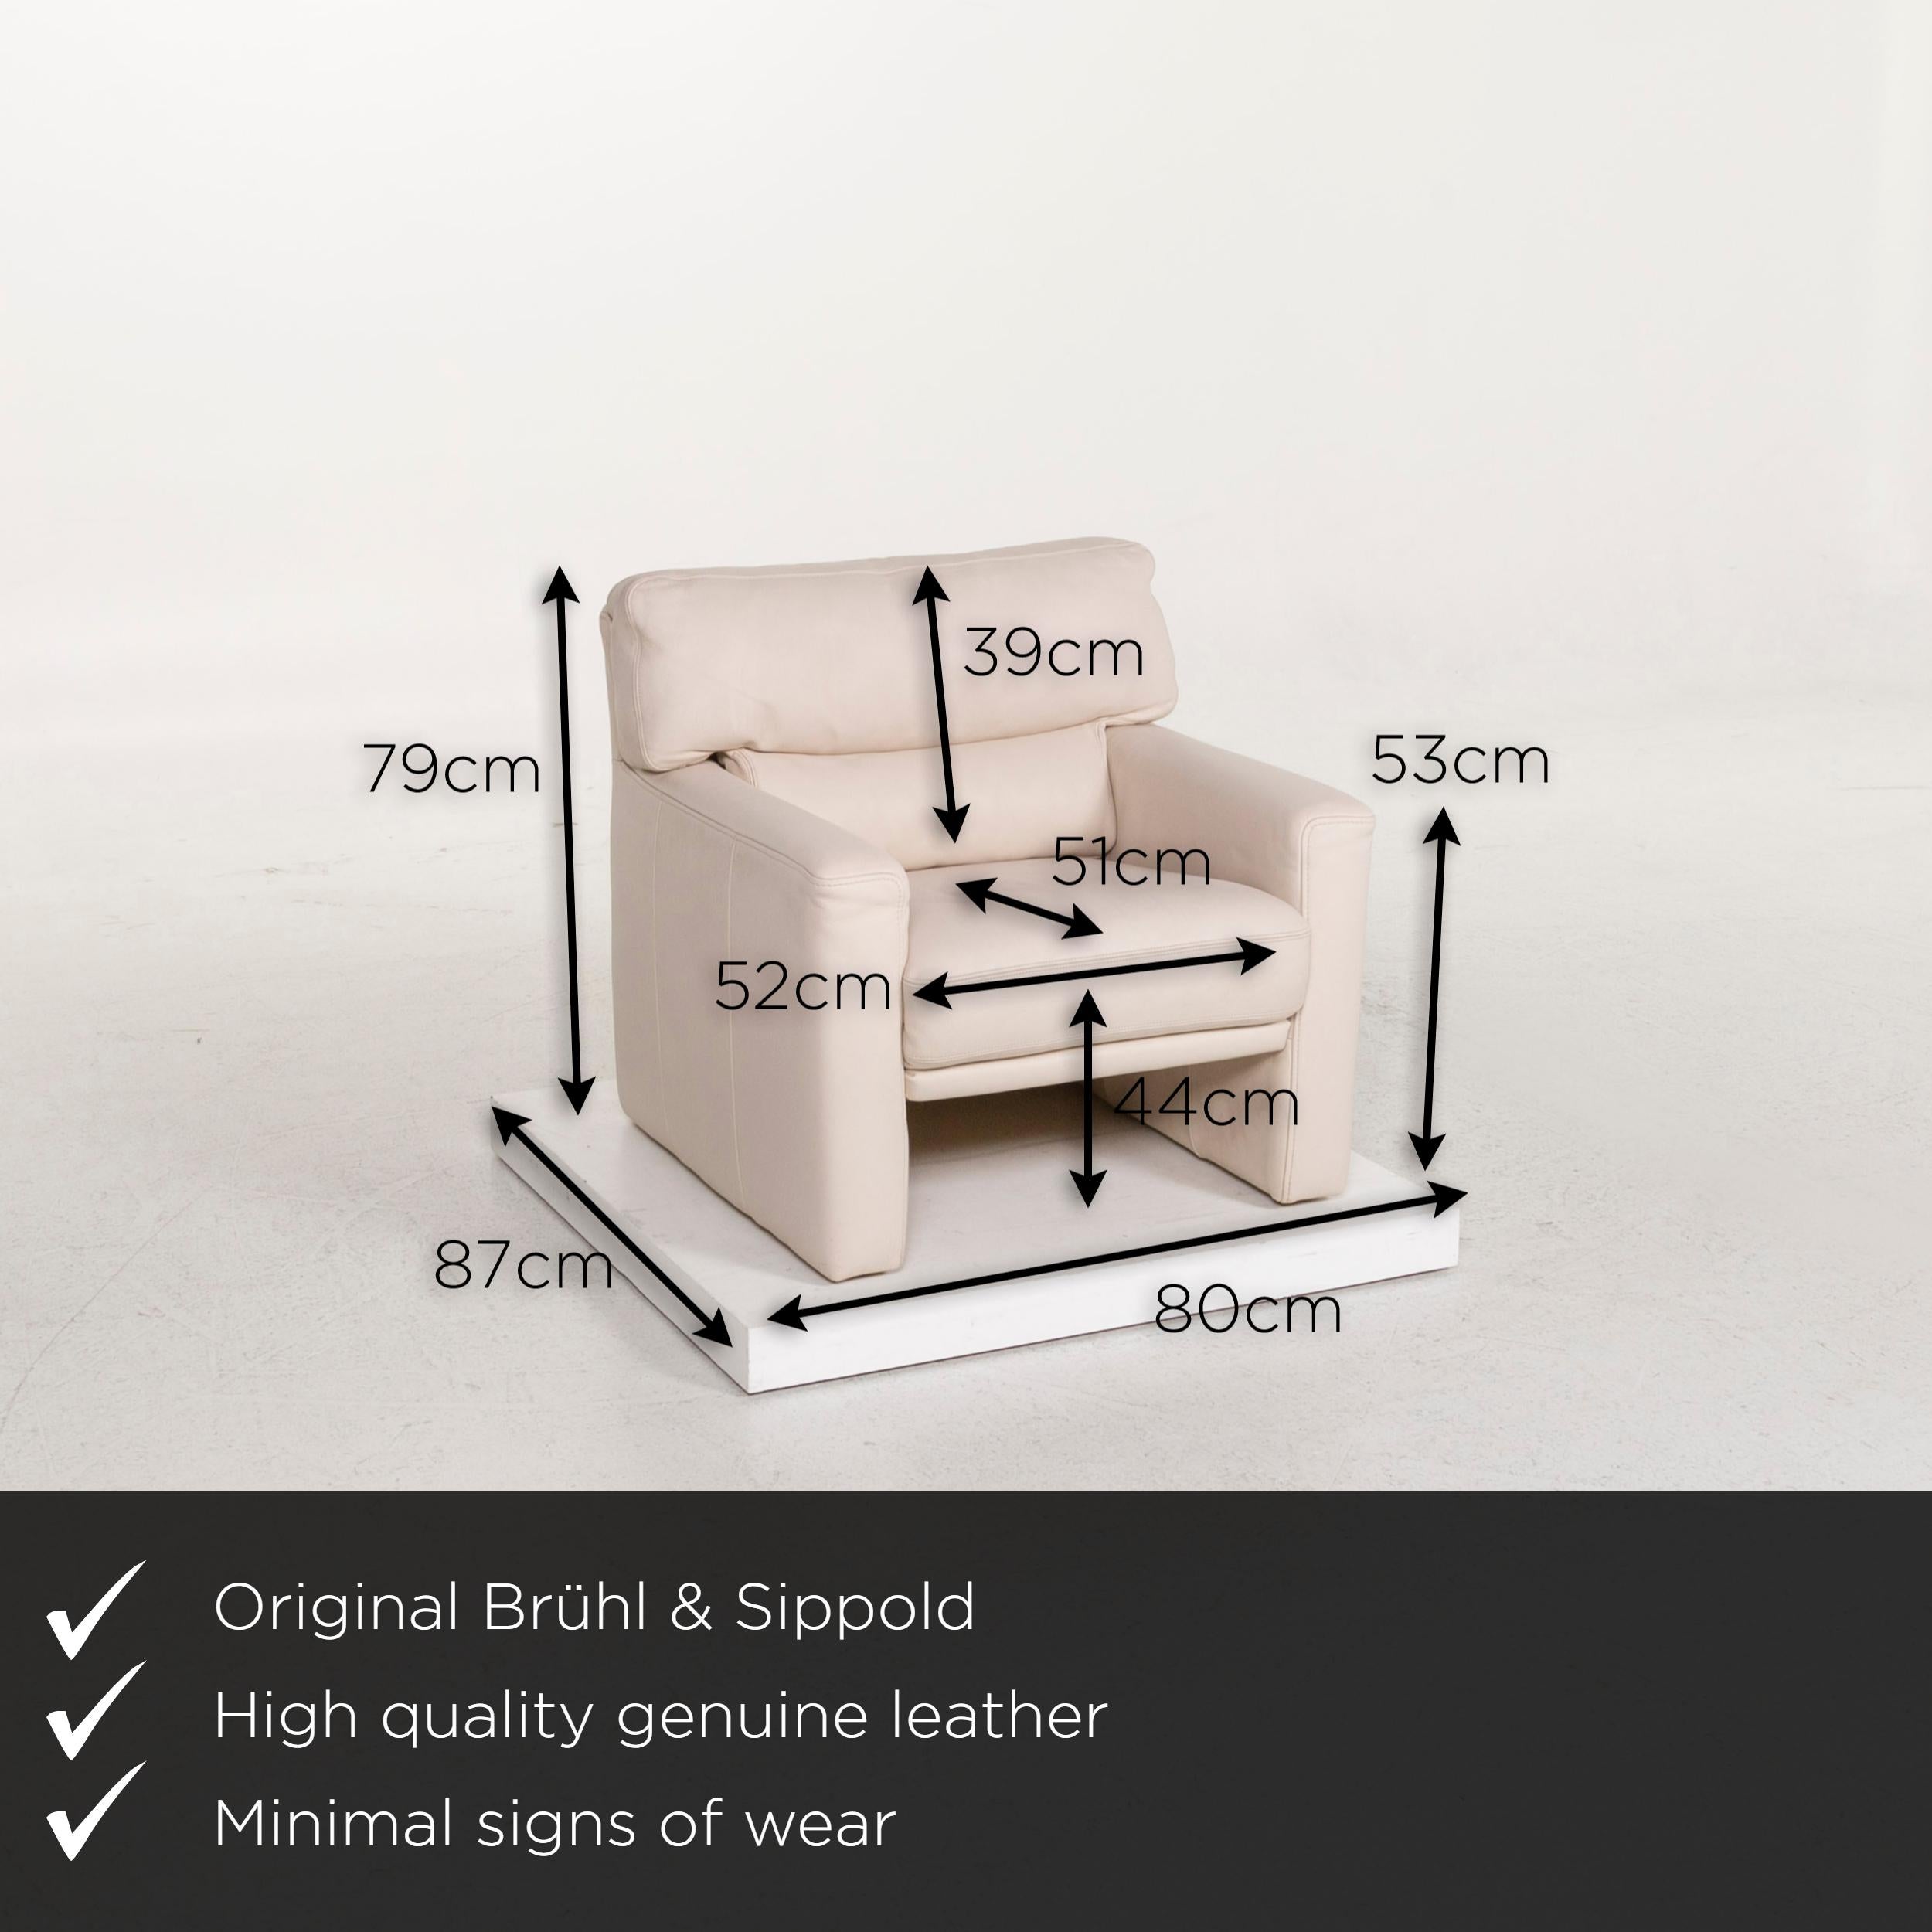 We present to you a Brühl & Sippold leather armchair cream.
 

 Product measurements in centimeters:
 

Depth 87
Width 80
Height 79
Seat height 44
Rest height 55
Seat depth 51
Seat width 52
Back height 39.

 